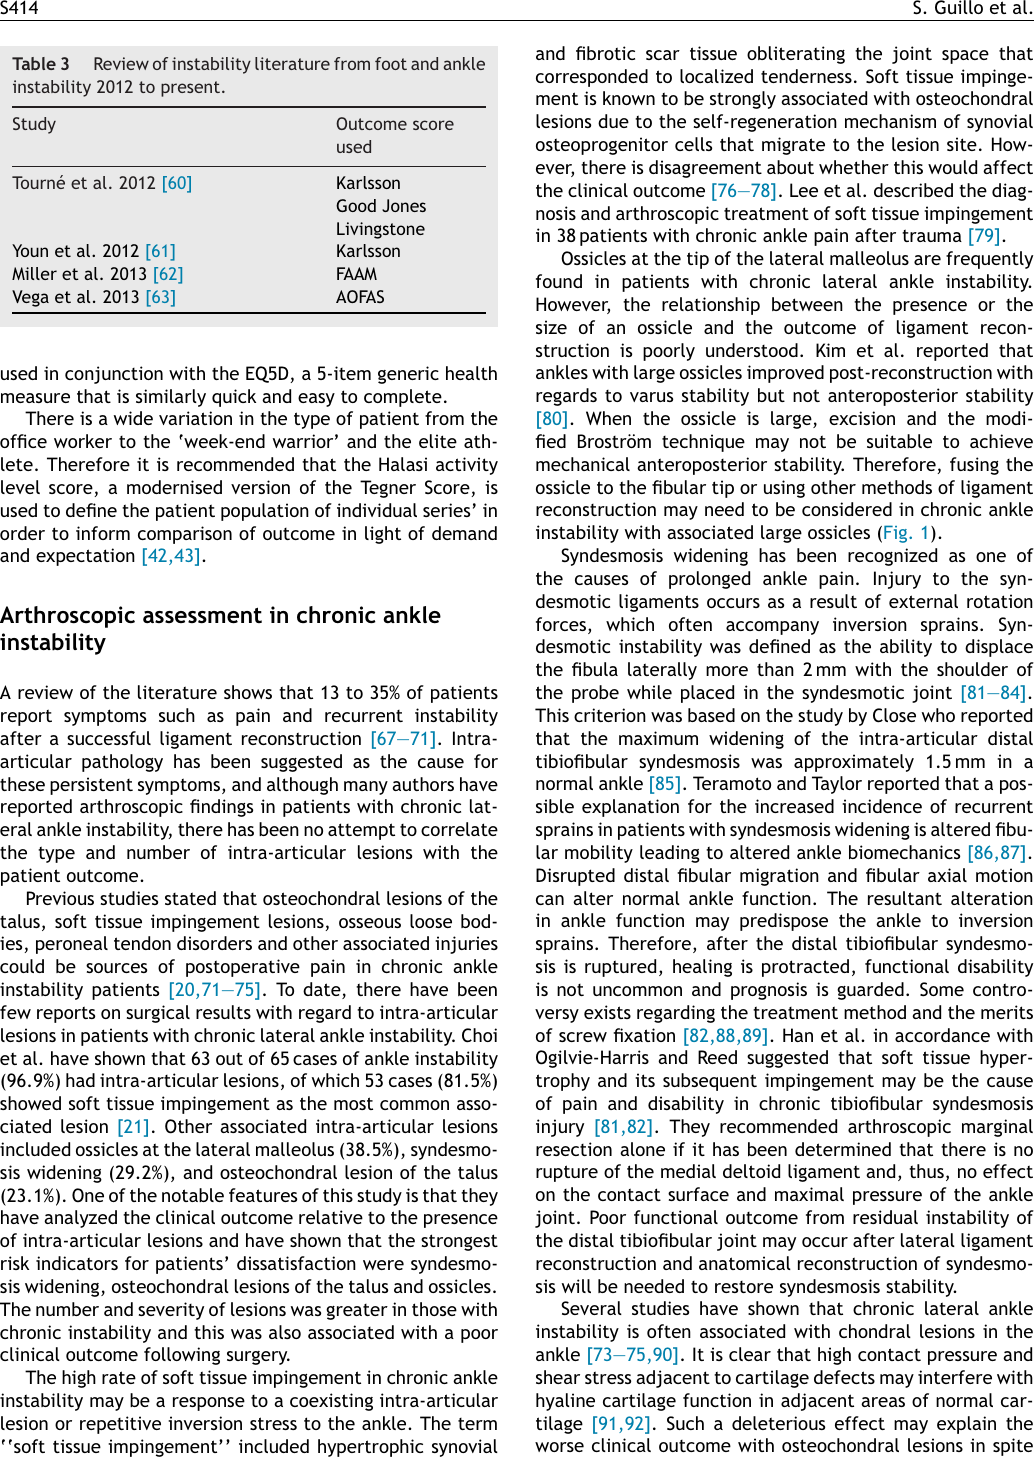 Page 4 of 9 - Consensus In Chronic Ankle Instability  OTSR CAI 20131